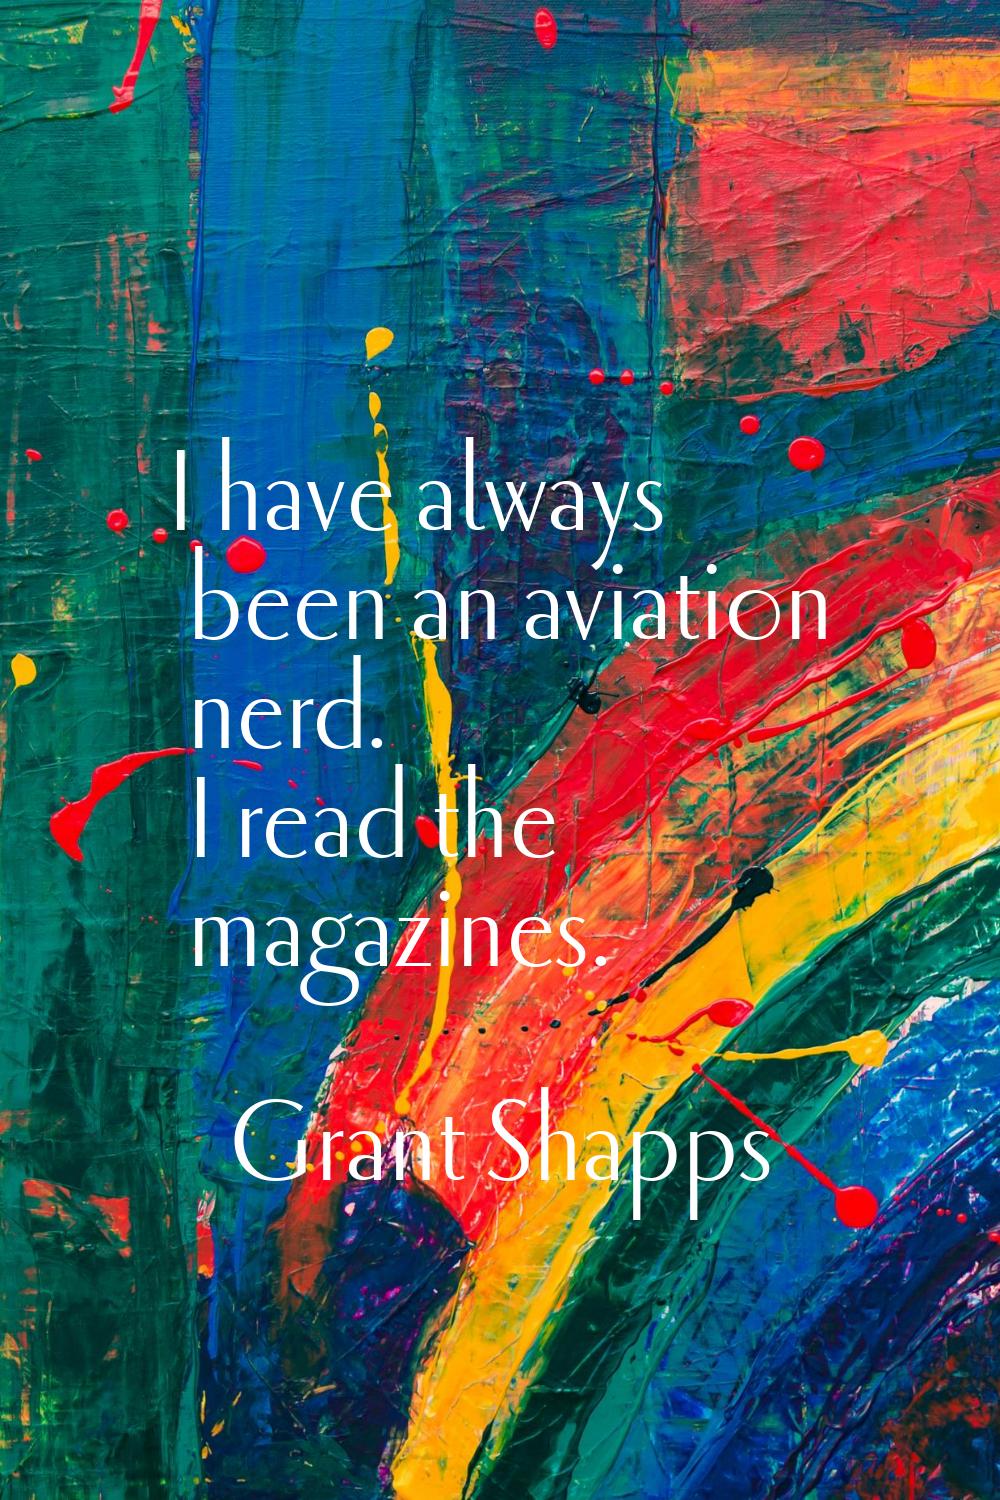 I have always been an aviation nerd. I read the magazines.